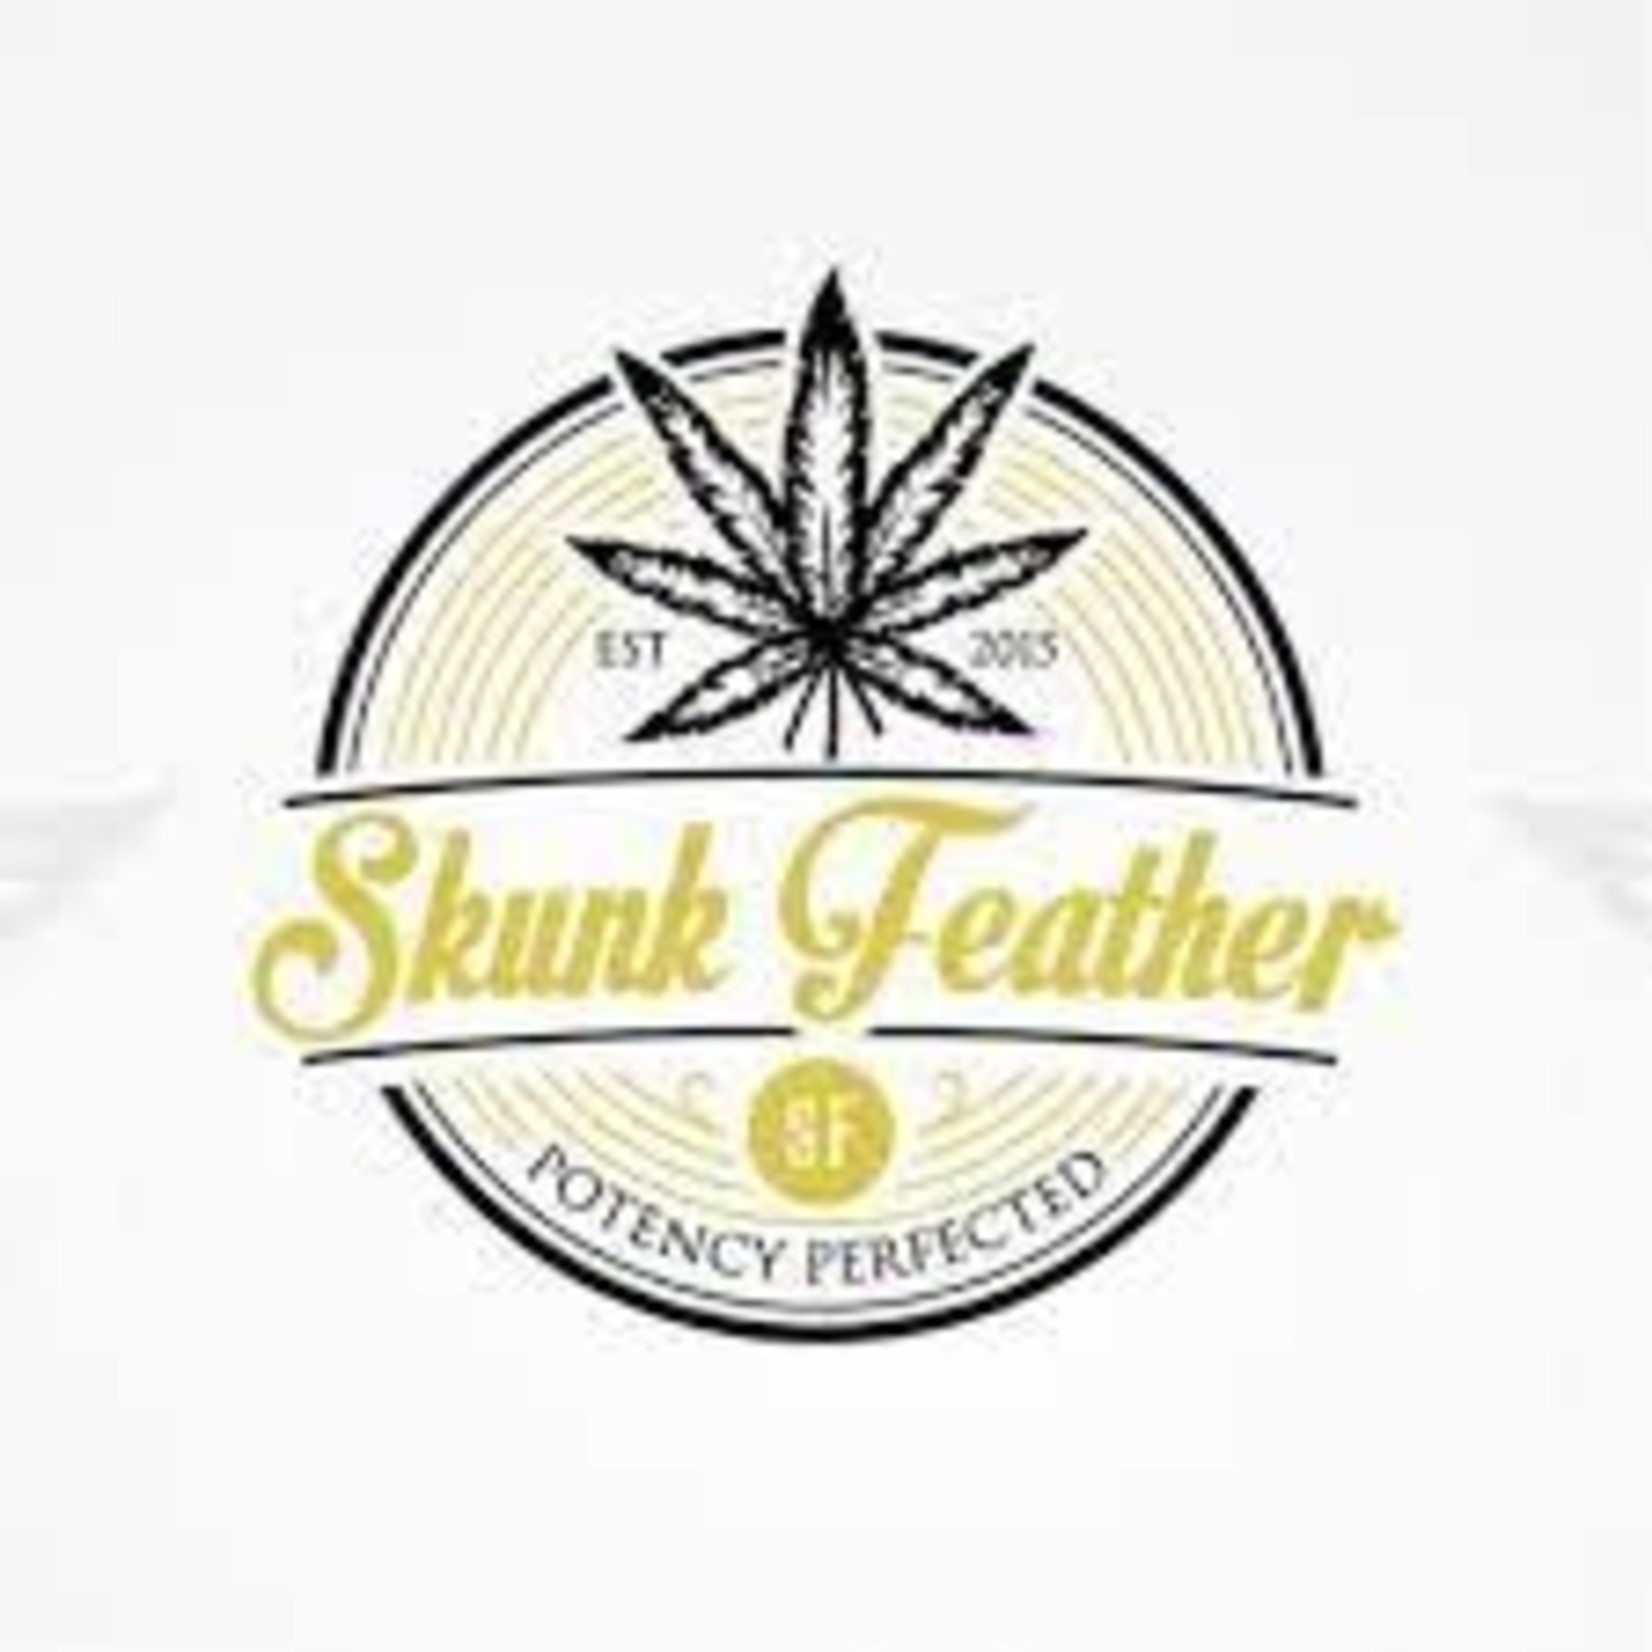 Skunk Feather / Gushers (2pk)